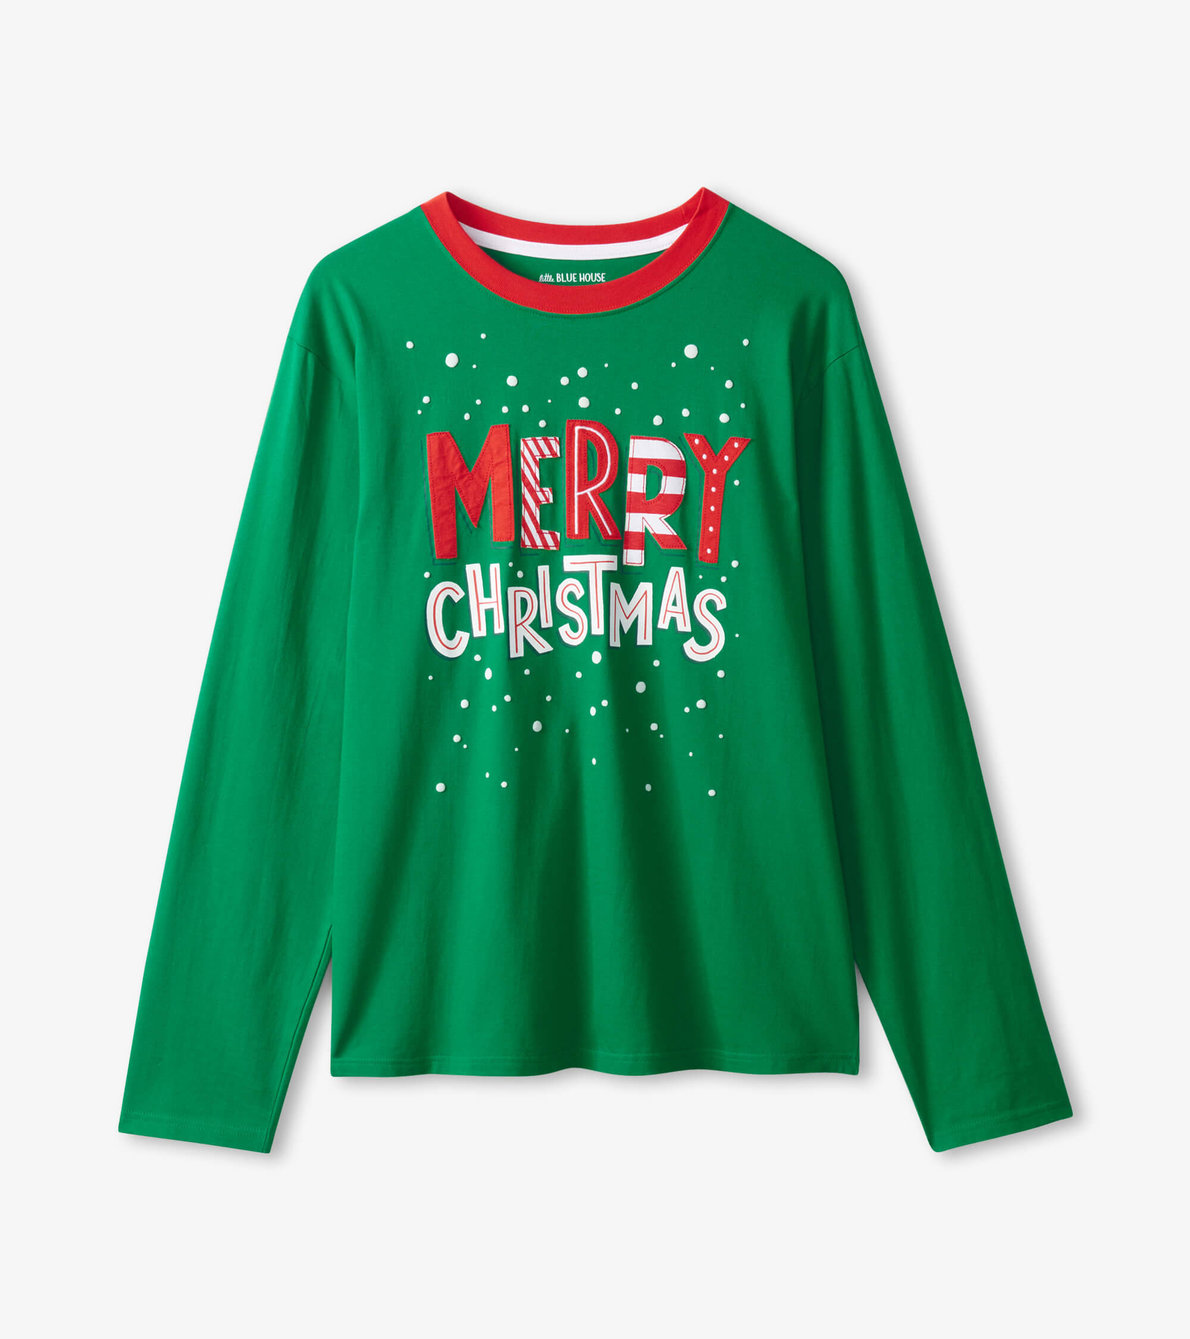 View larger image of Men's Merry Christmas Long Sleeve T-Shirt